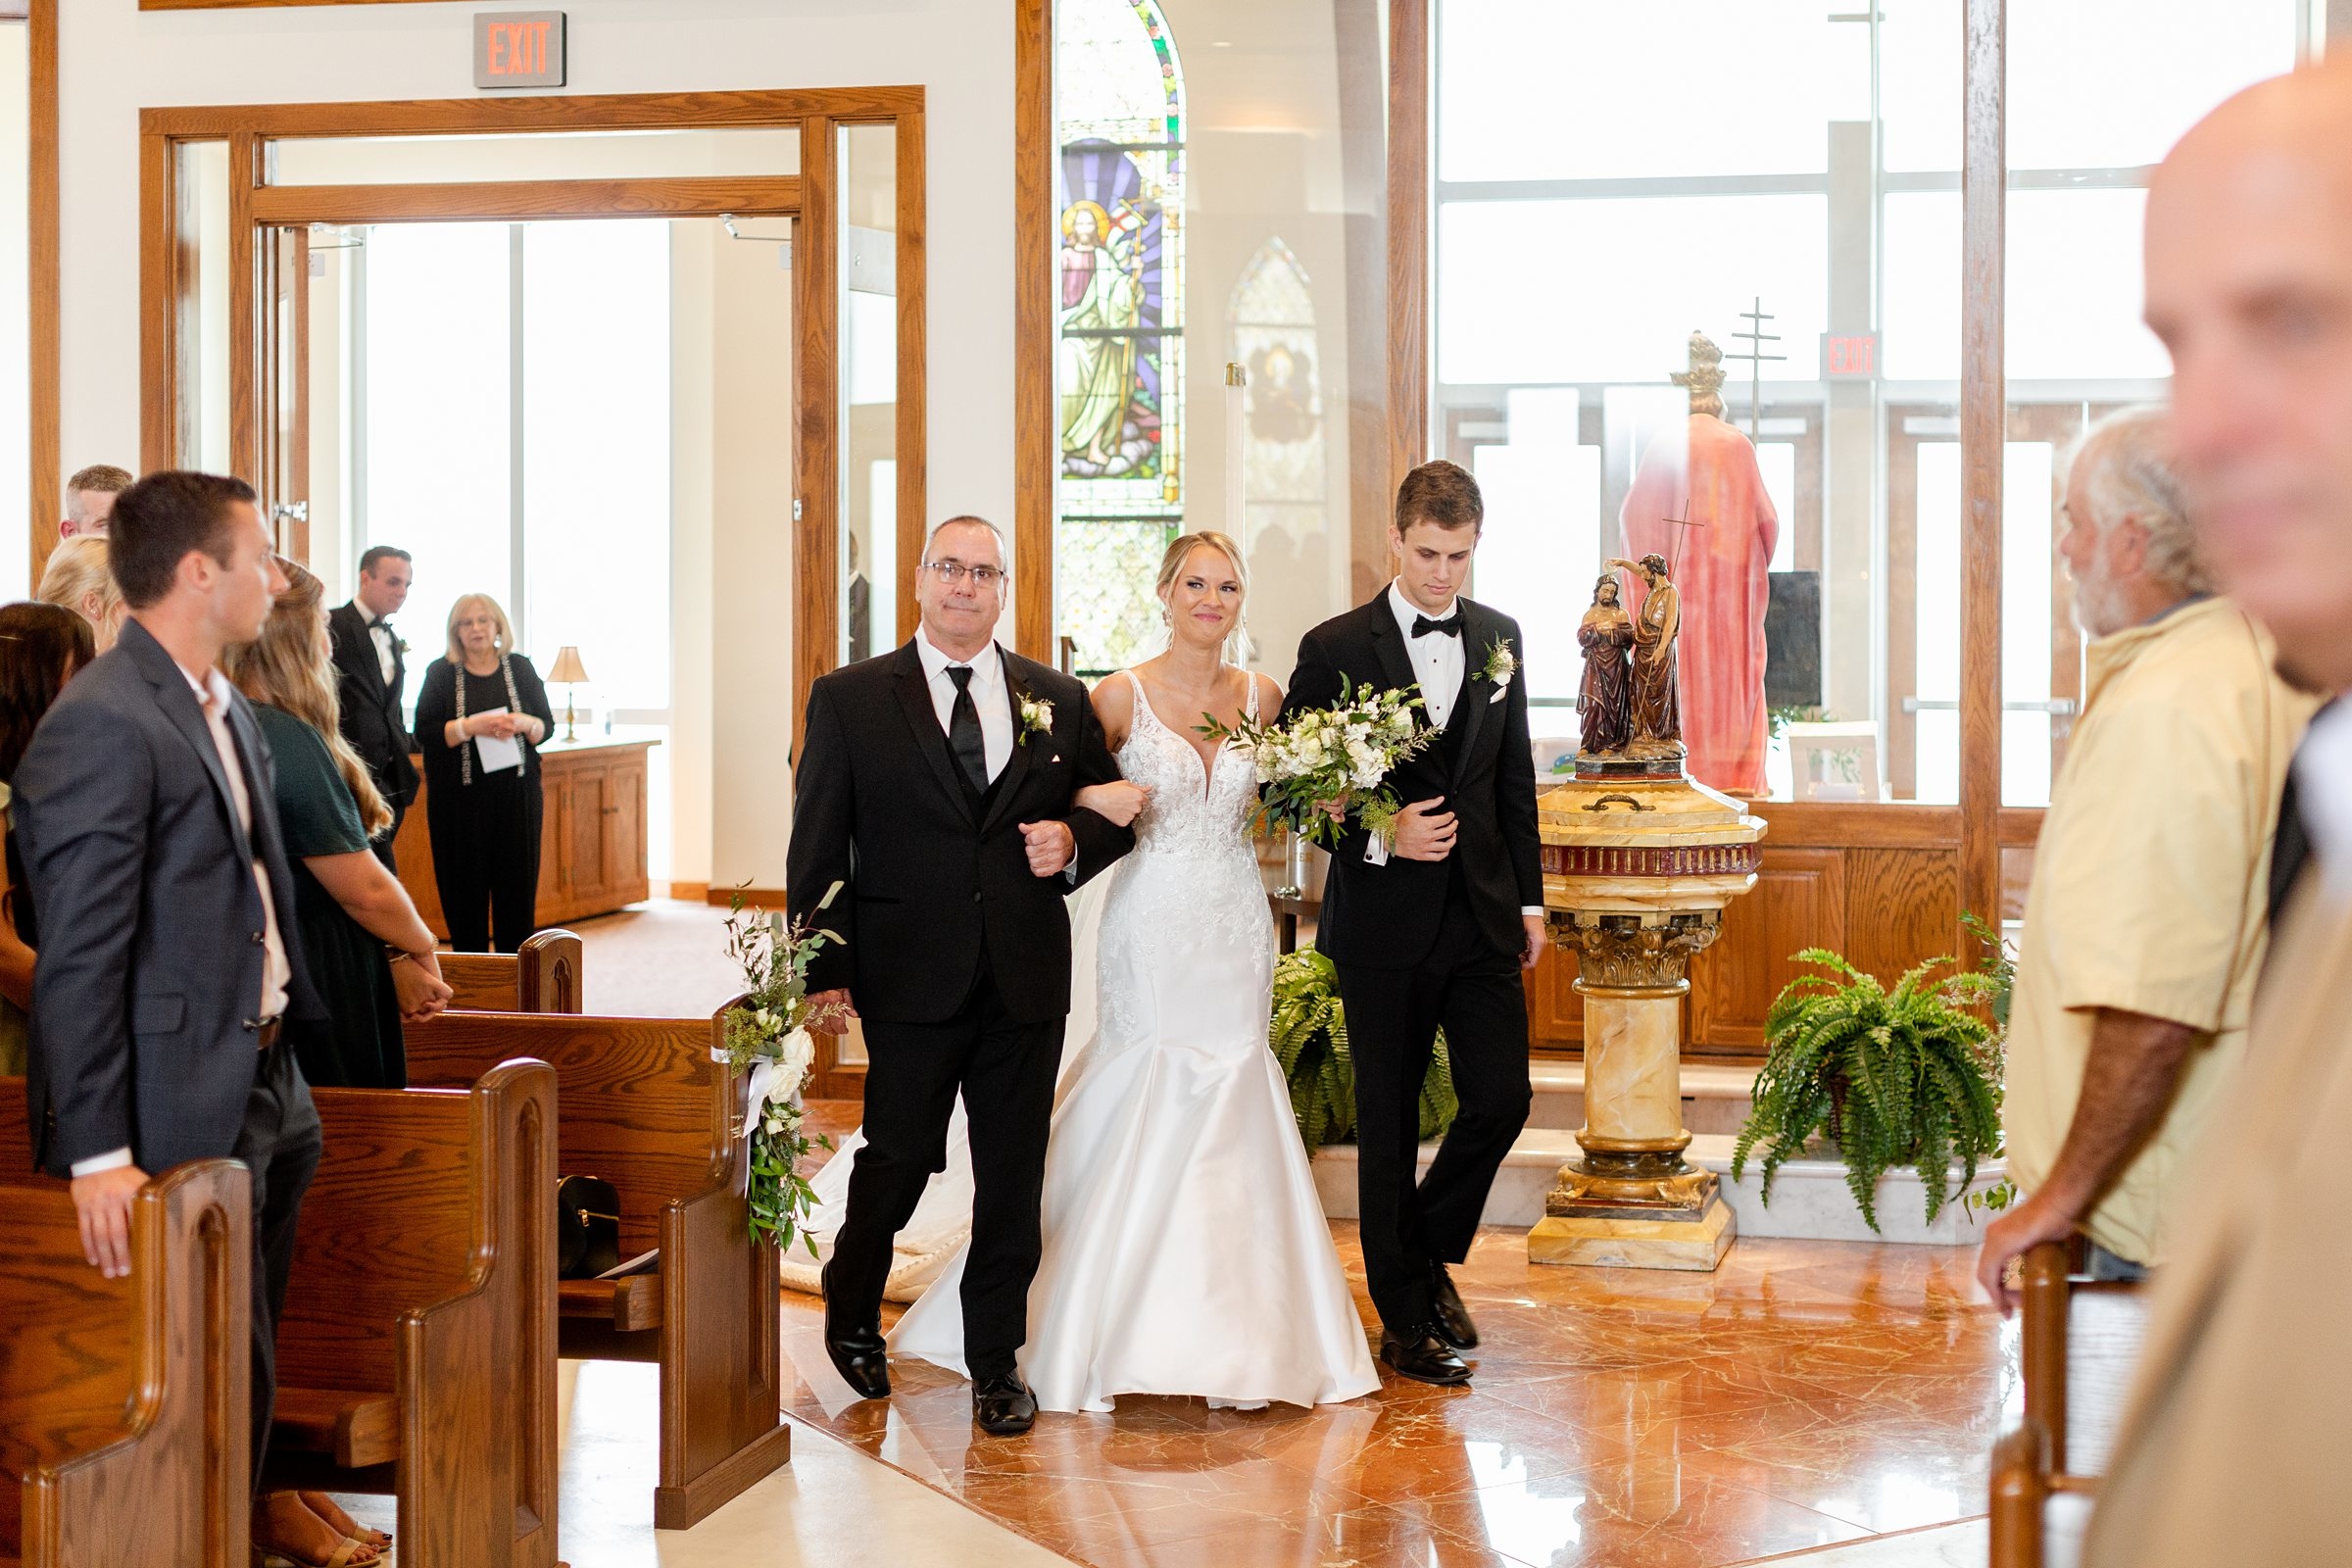 Hannah and Cody's Wedding in Booneville, IN135.jpg